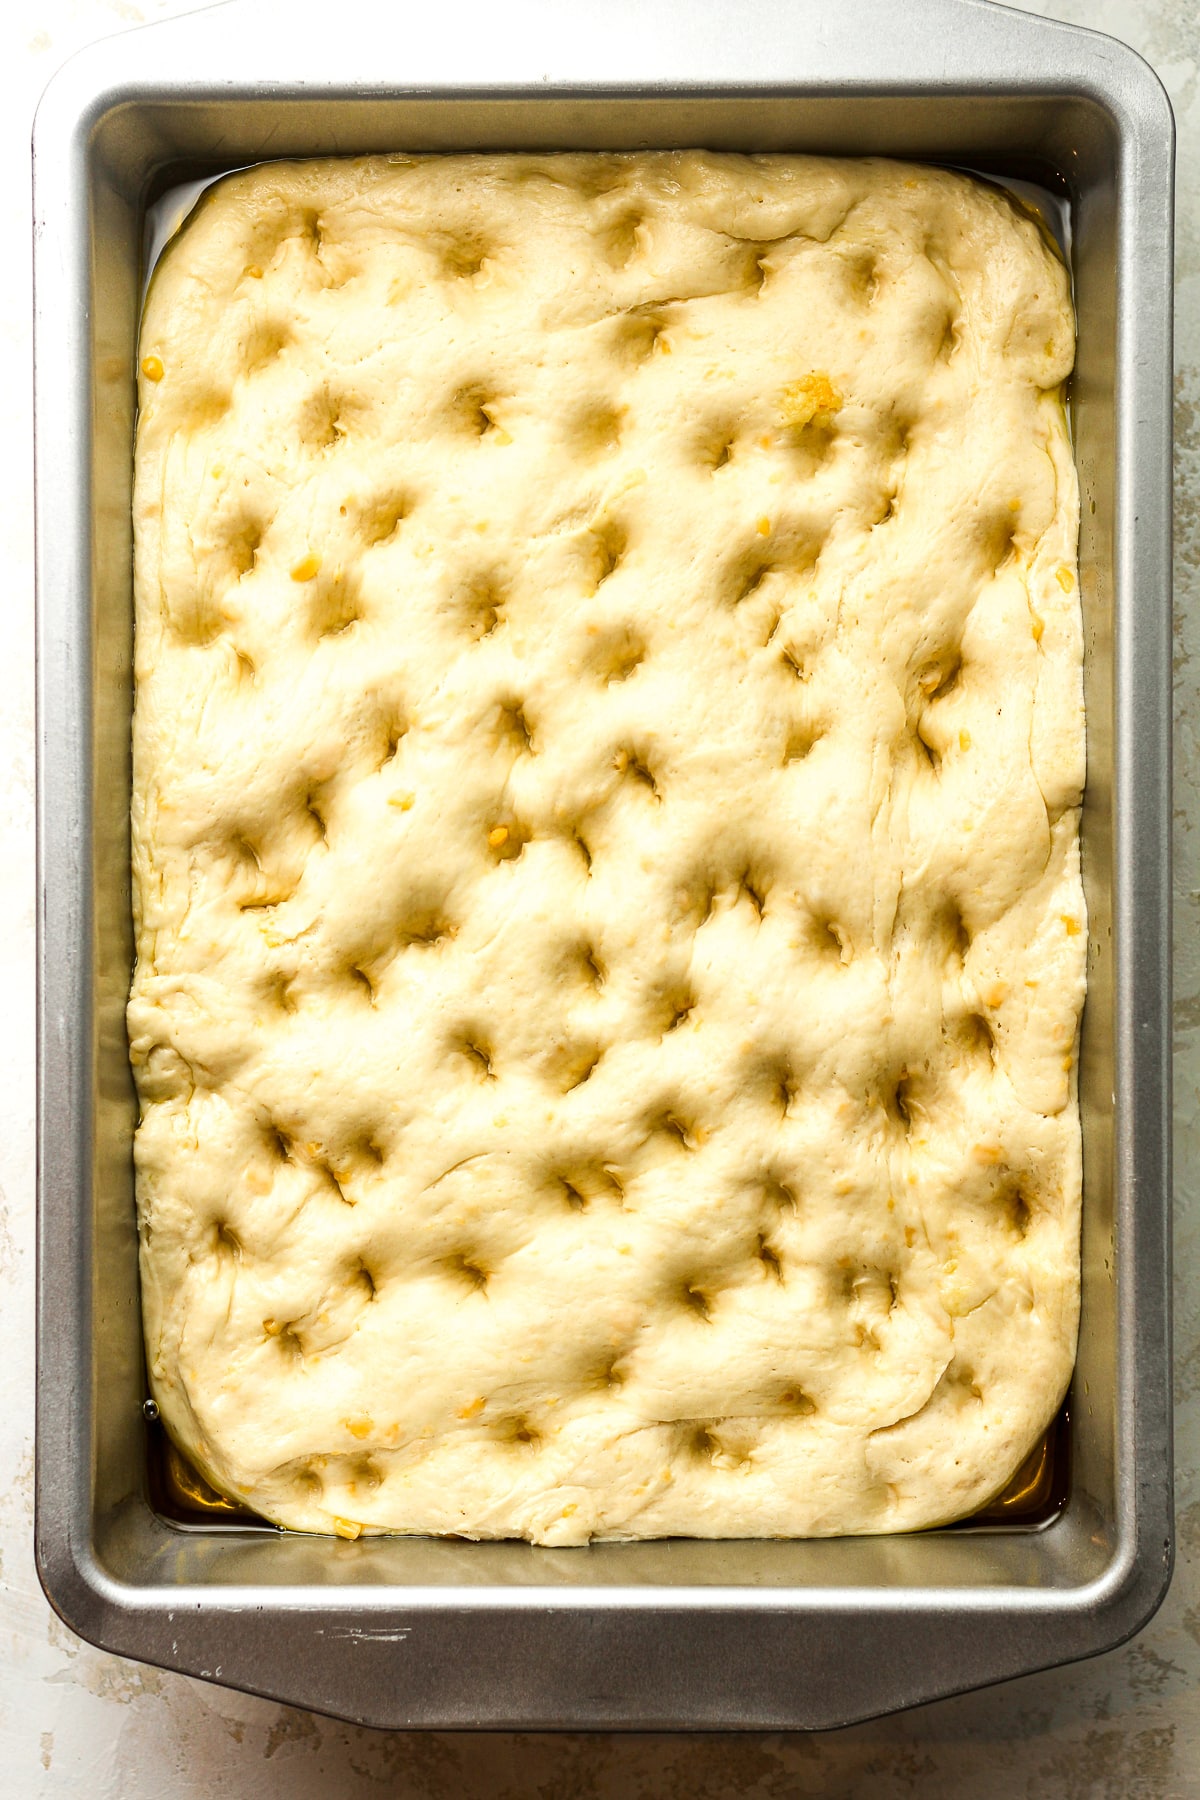 A pan of the focaccia dough with dimples.